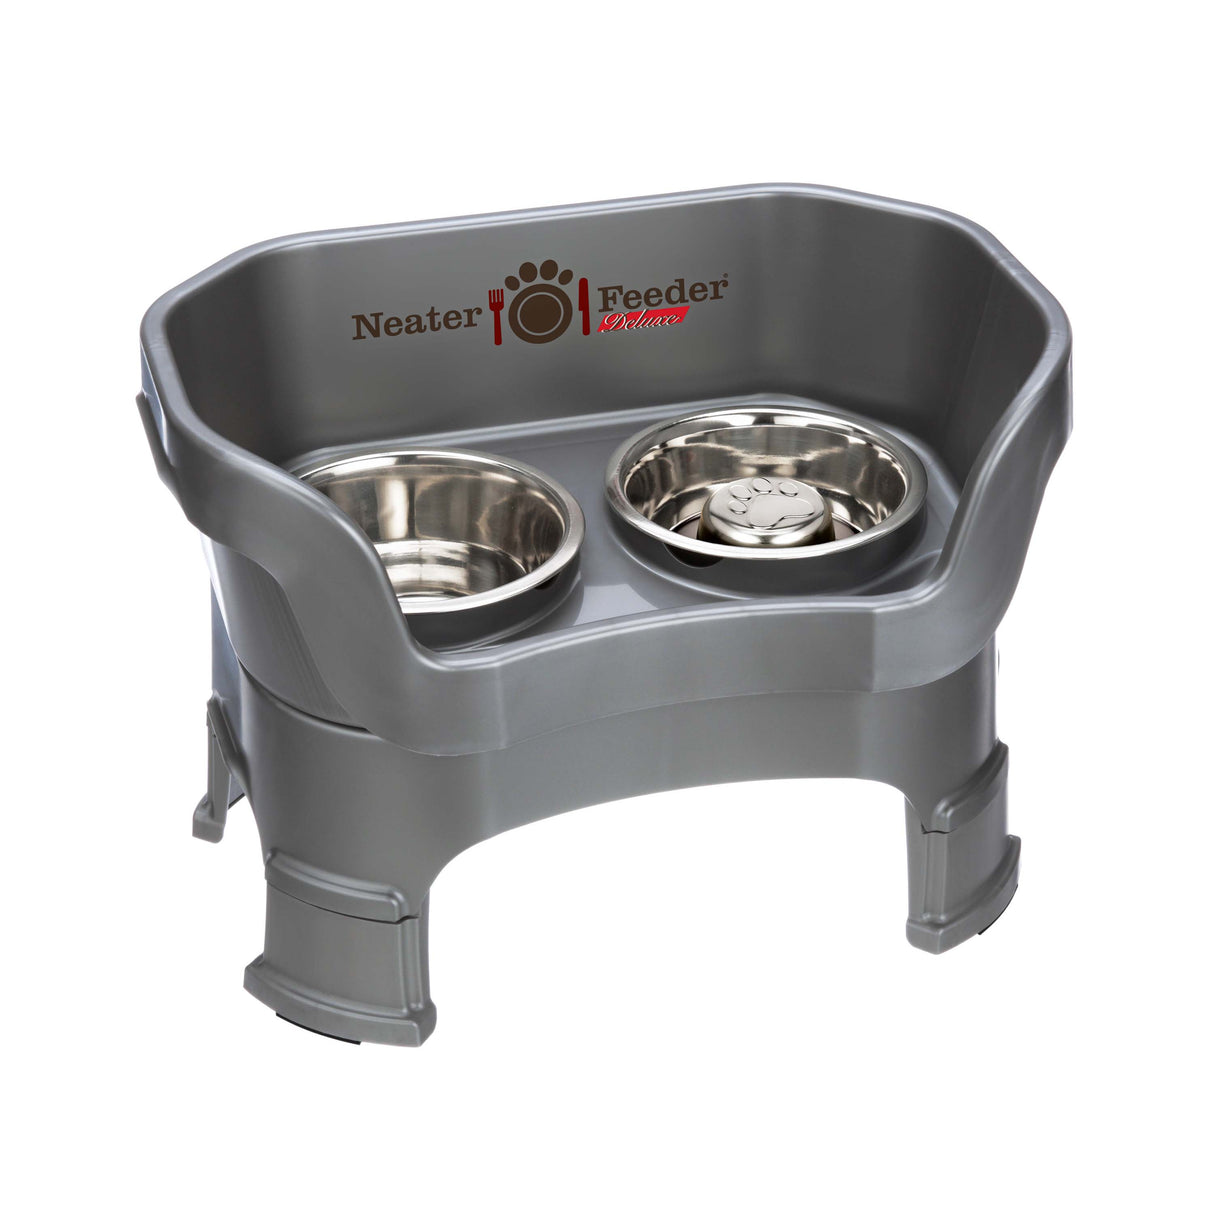 gunmetal gray medium DELUXE Neater Feeder with Stainless Steel Slow Feed Bowl with leg extensions